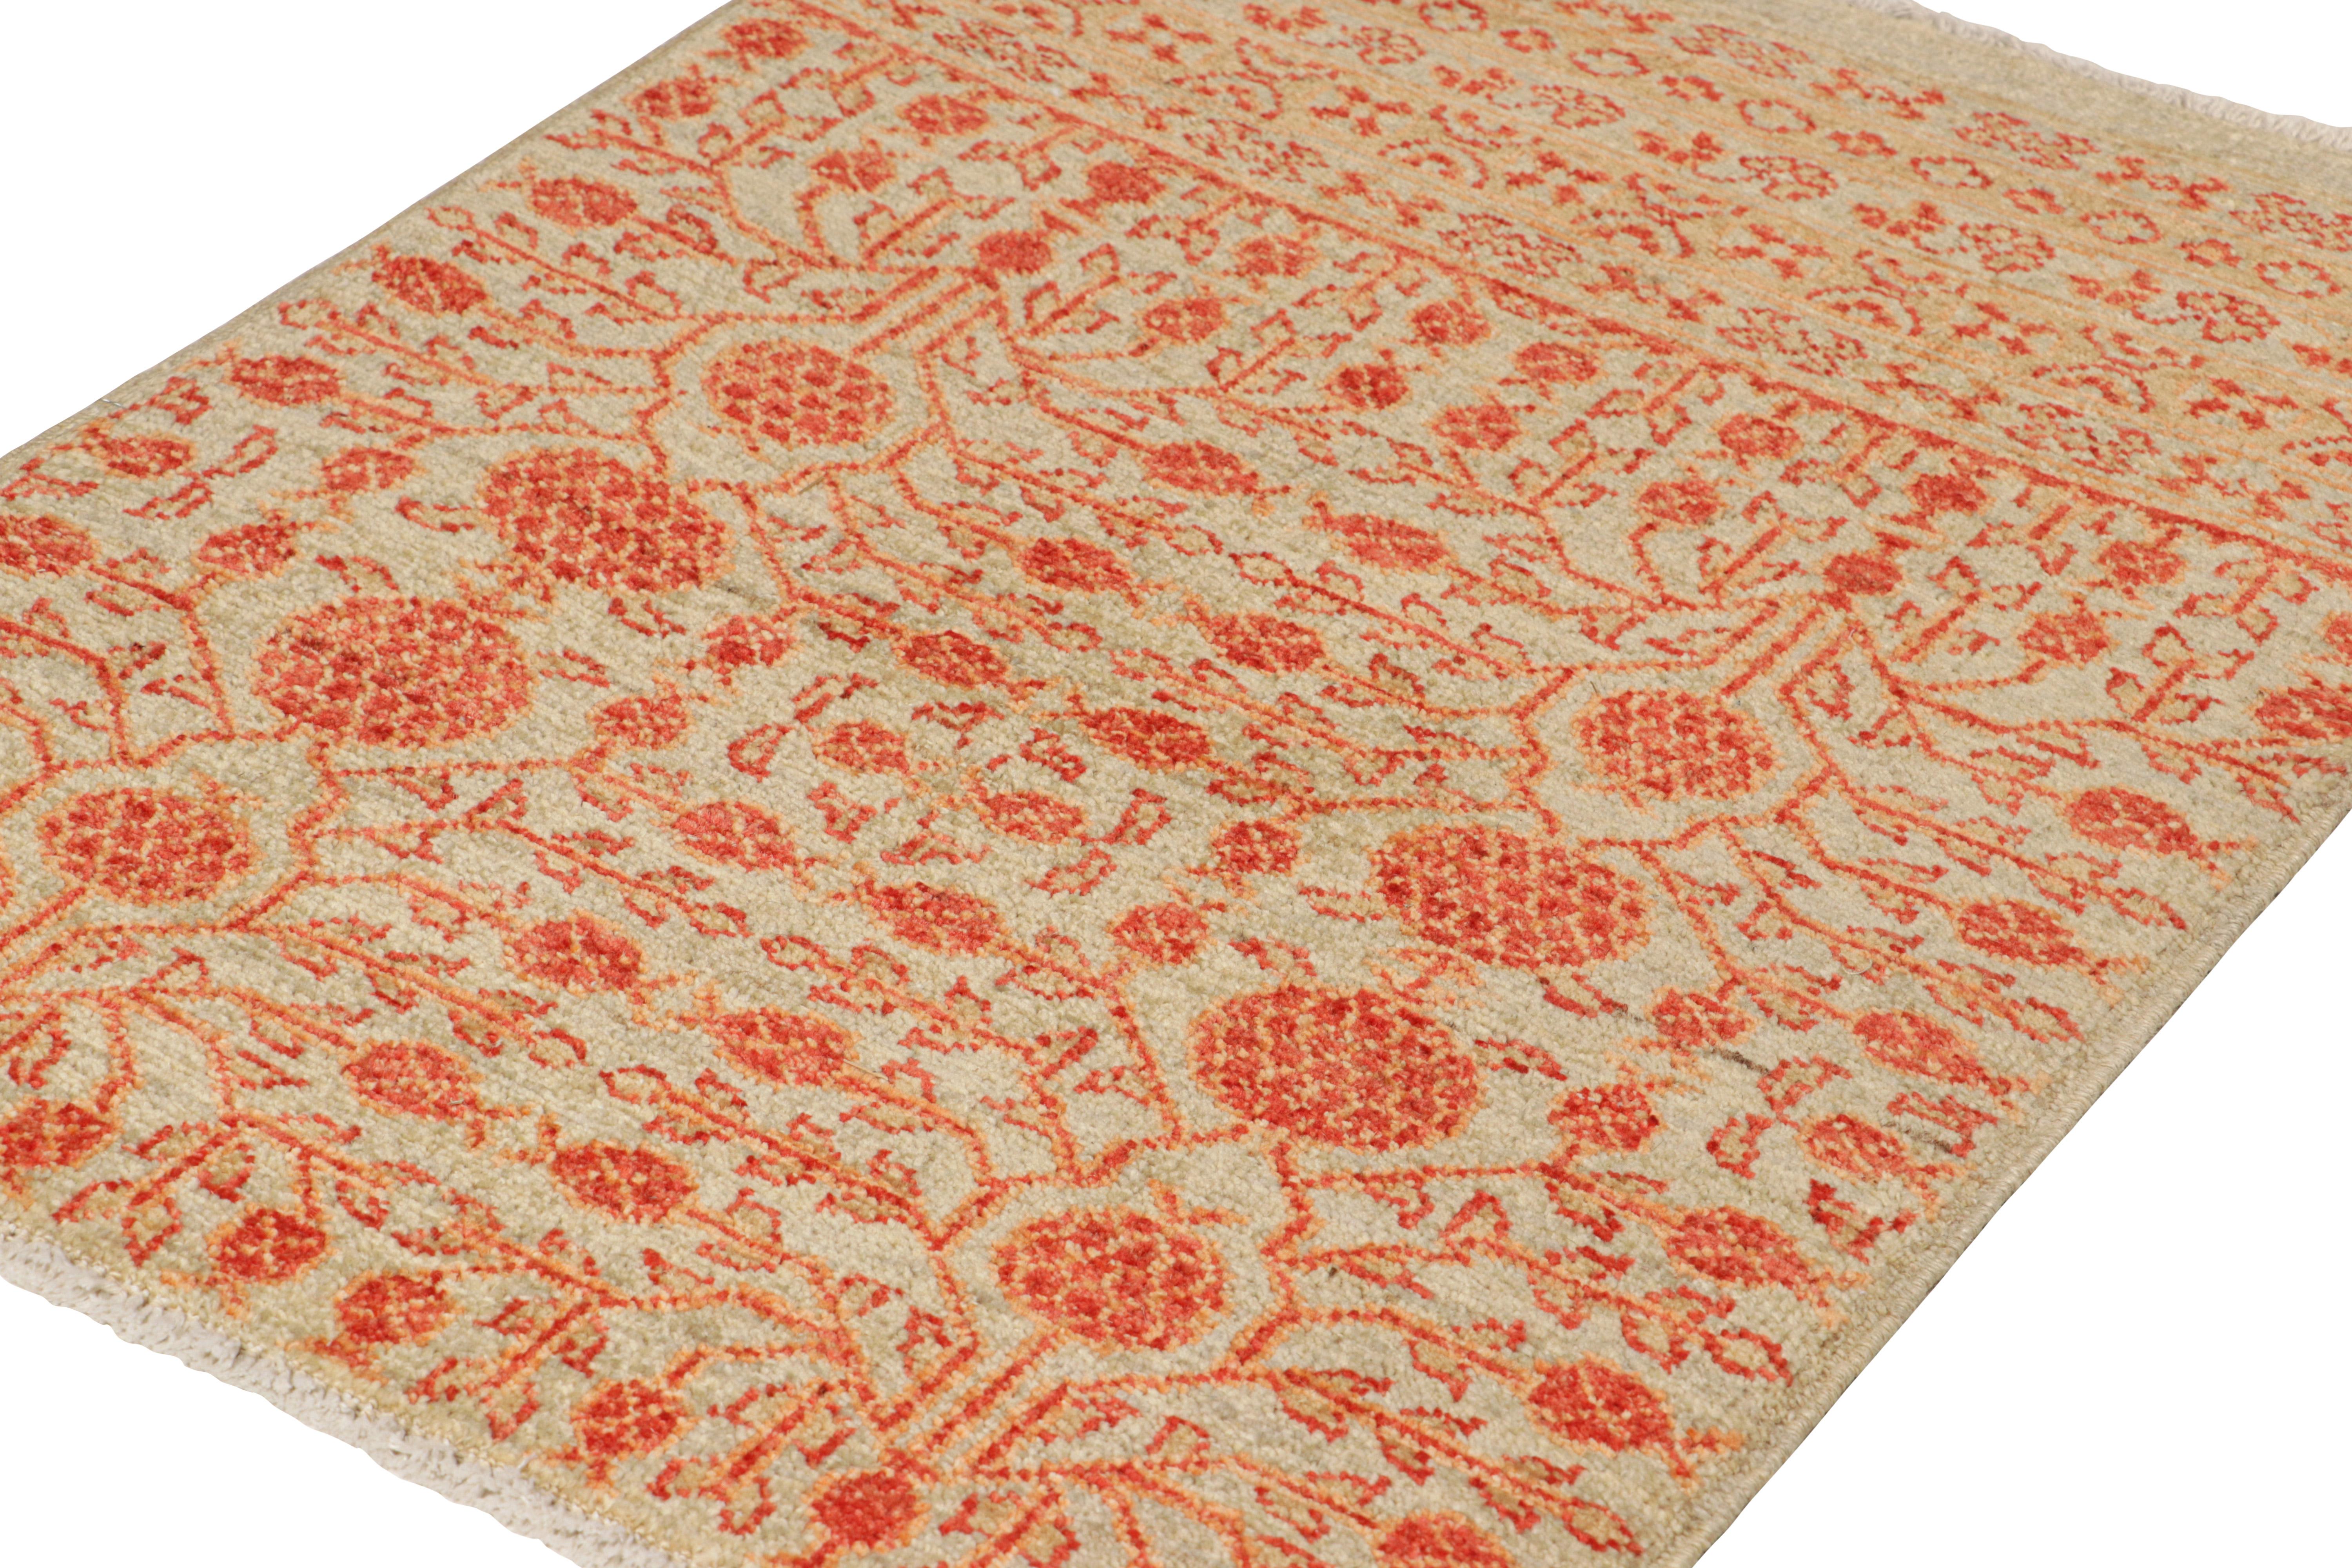 Indian Rug & Kilim’s Khotan Style Rug in Beige-Brown with Pomegranate Patterns For Sale